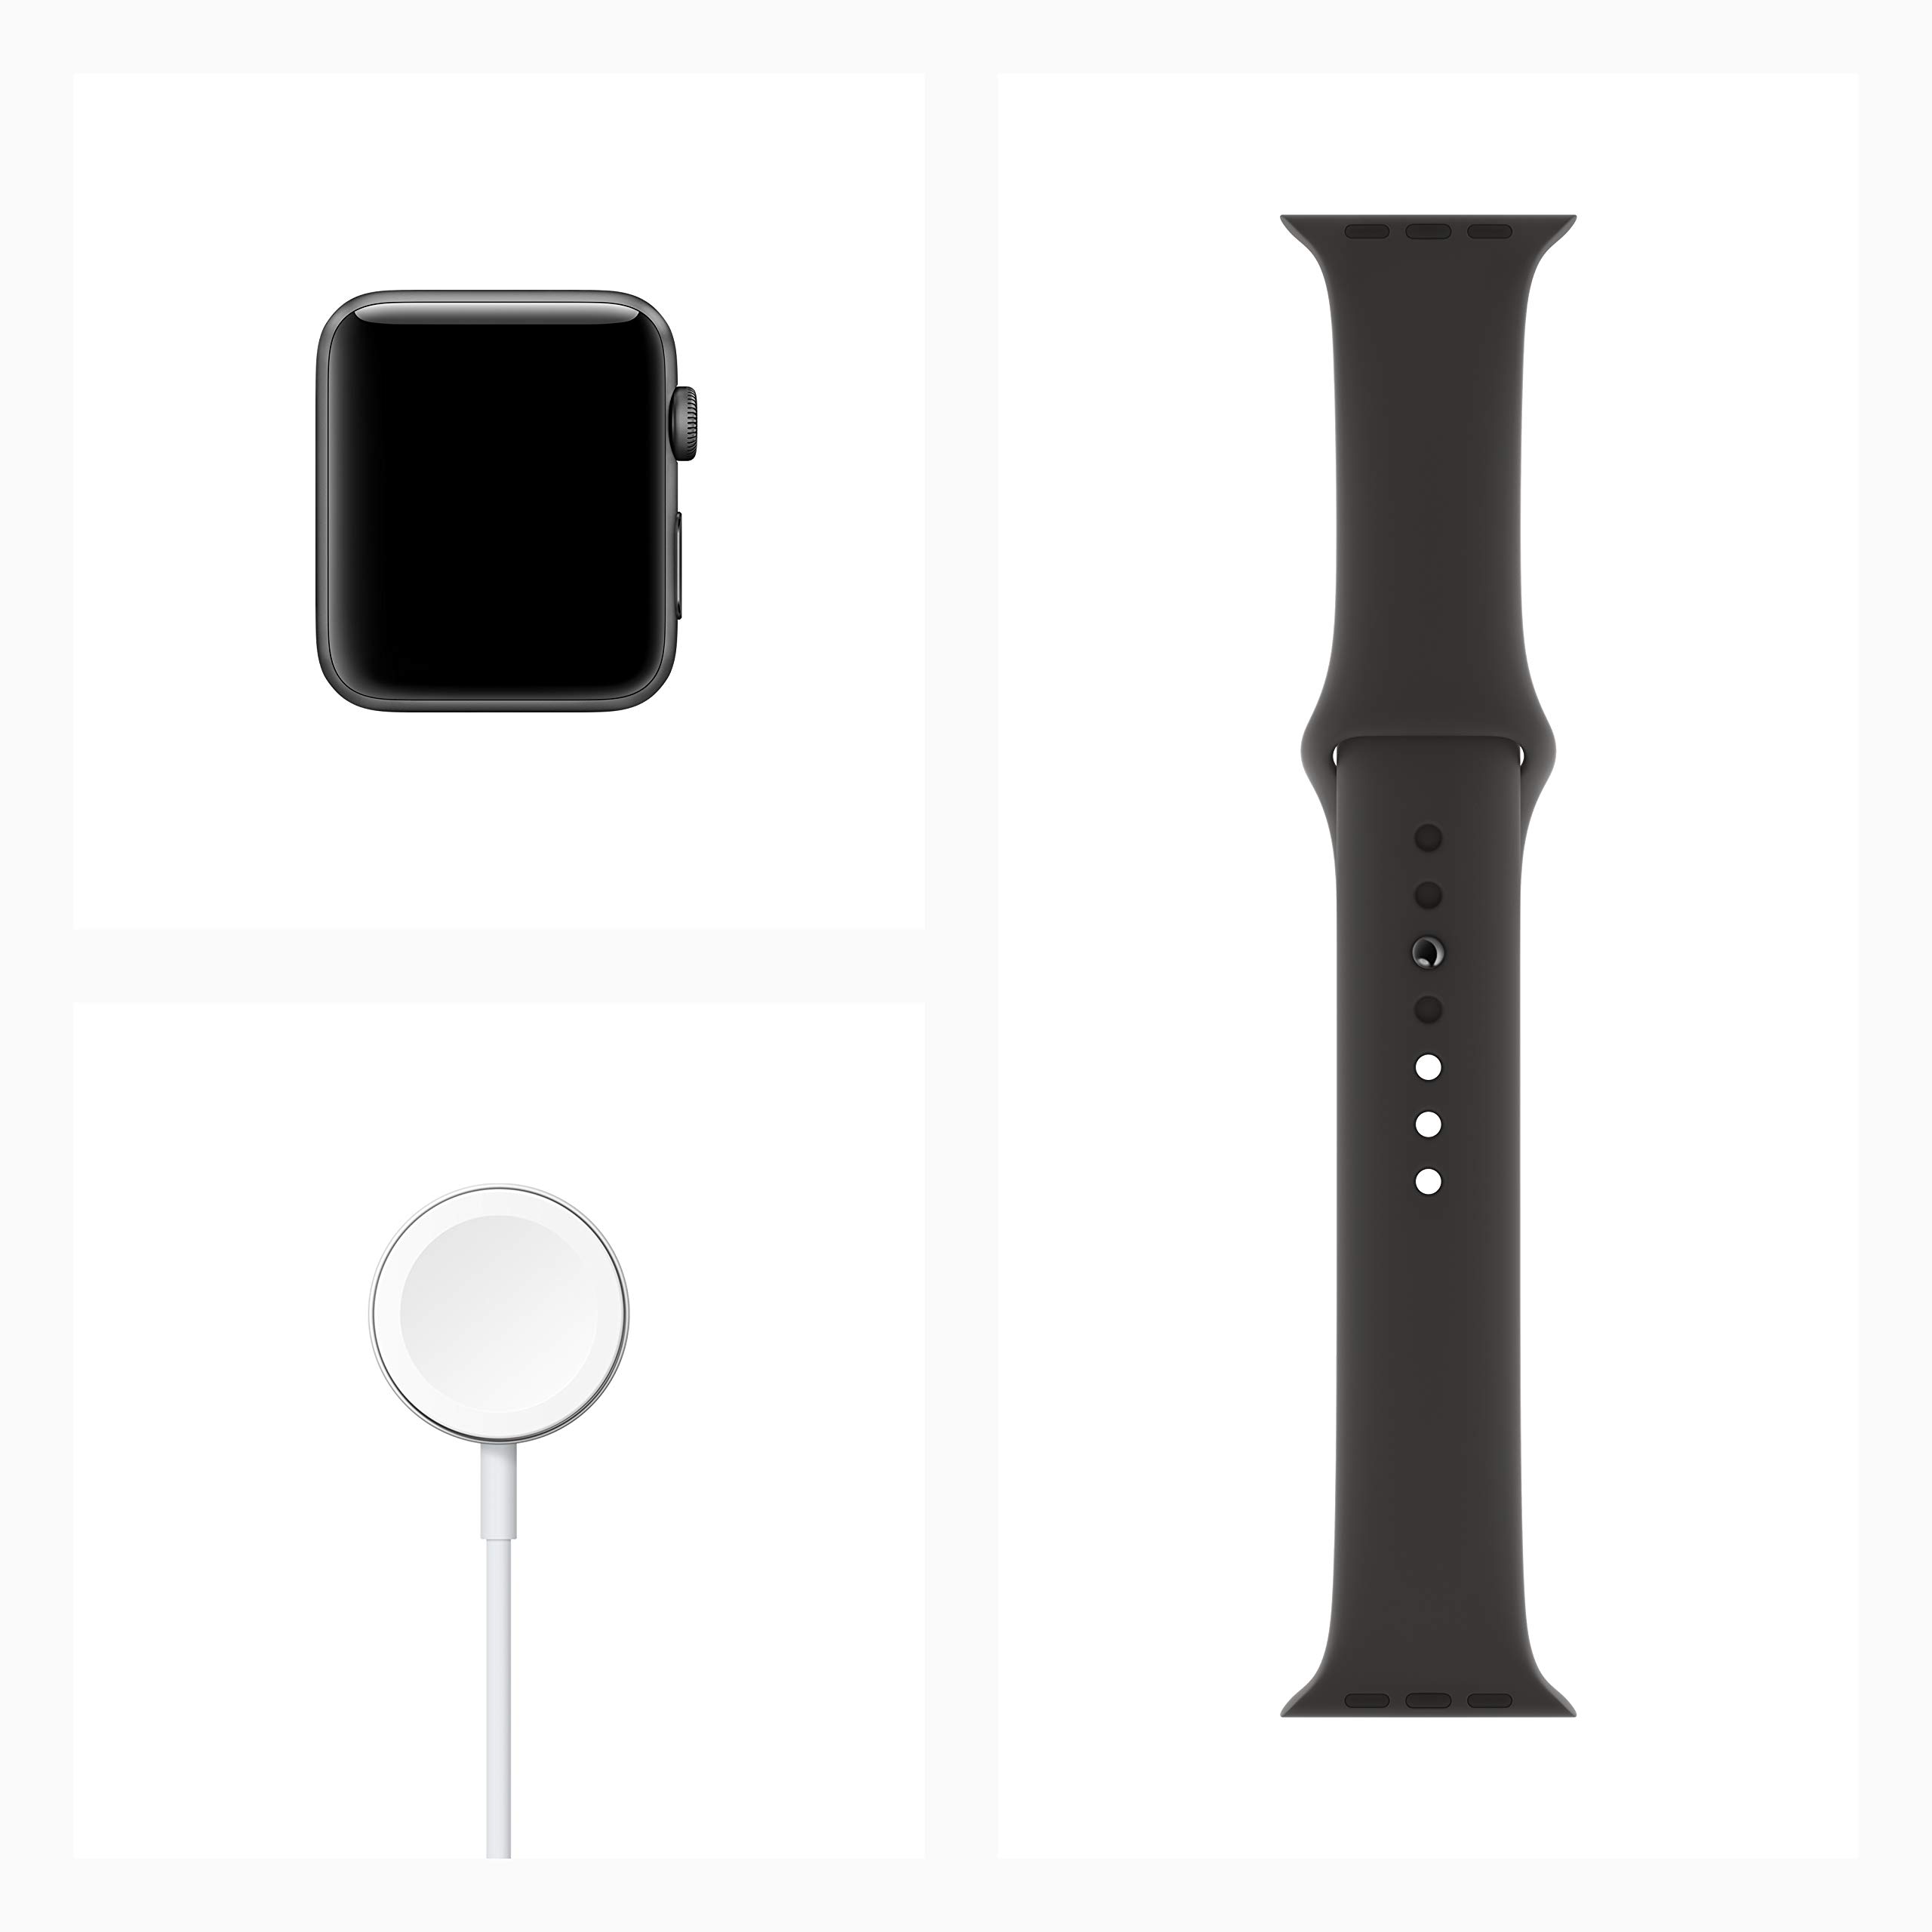 Apple Watch Series 3 [GPS 42mm] Smart Watch w/Space Gray Aluminum Case & Black Sport Band. Fitness & Activity Tracker, Heart Rate Monitor, Retina Display, Water Resistant